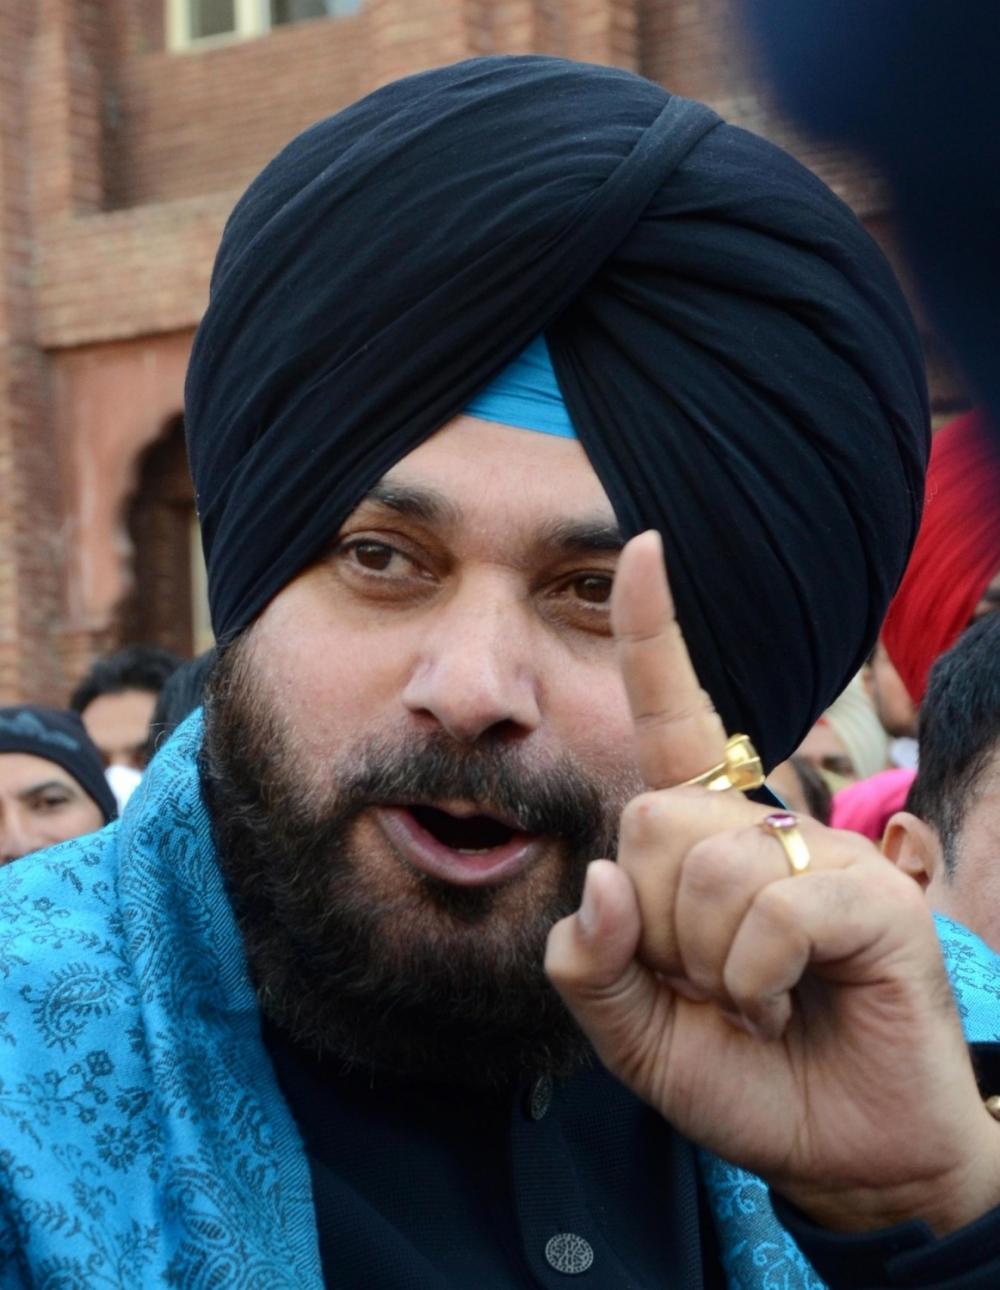 The Weekend Leader - 'Hand can also be weapon': SC on 1-year rigorous imprisonment for Navjot Singh Sidhu